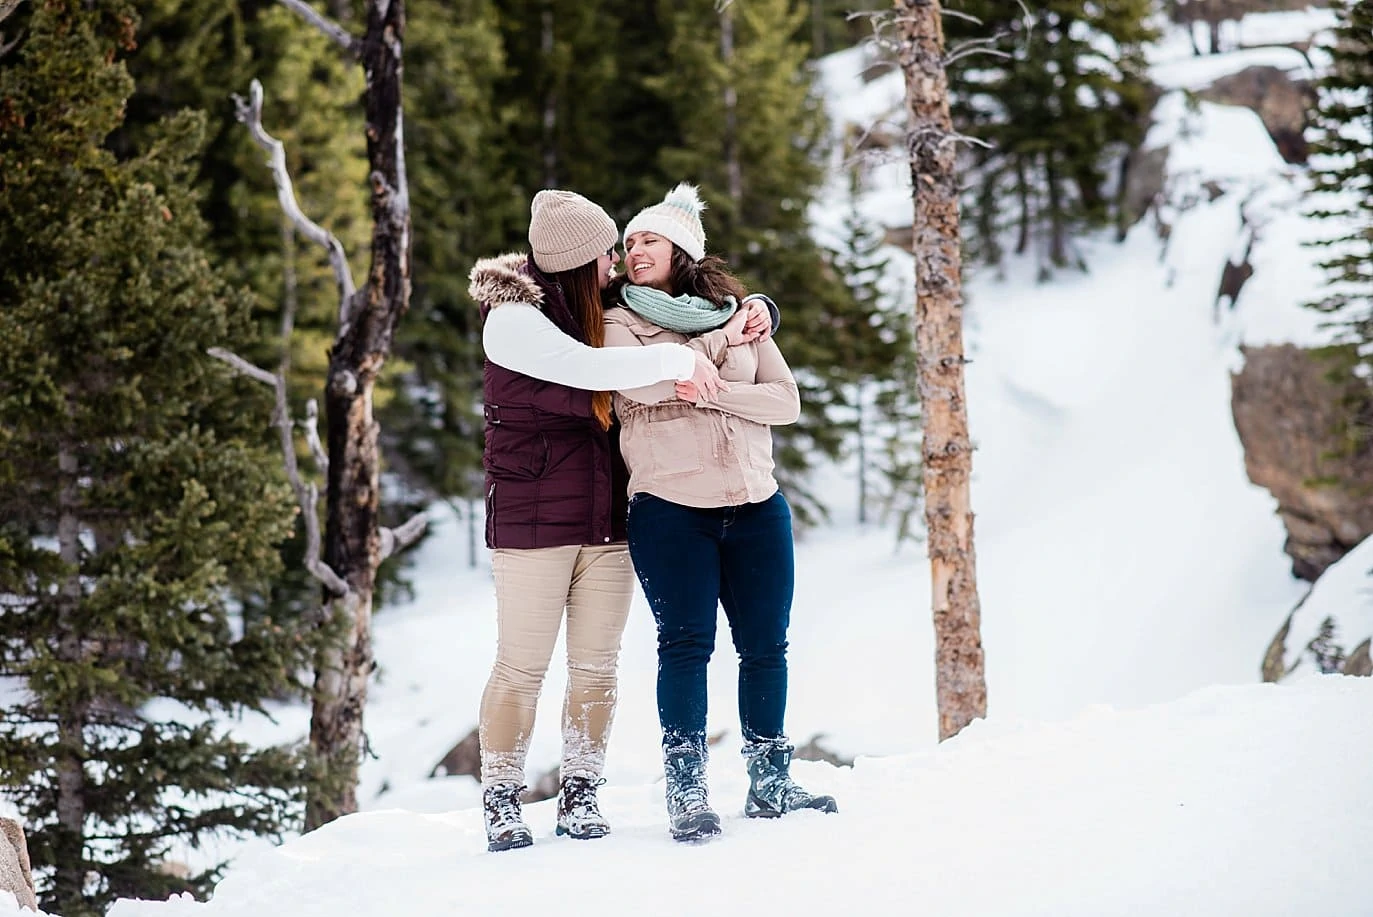 romantic snowy engagement Alberta Falls Rocky Mountain National Park winter hiking engagement by Fort Collins engagement photographer Jennie Crate, Photographer